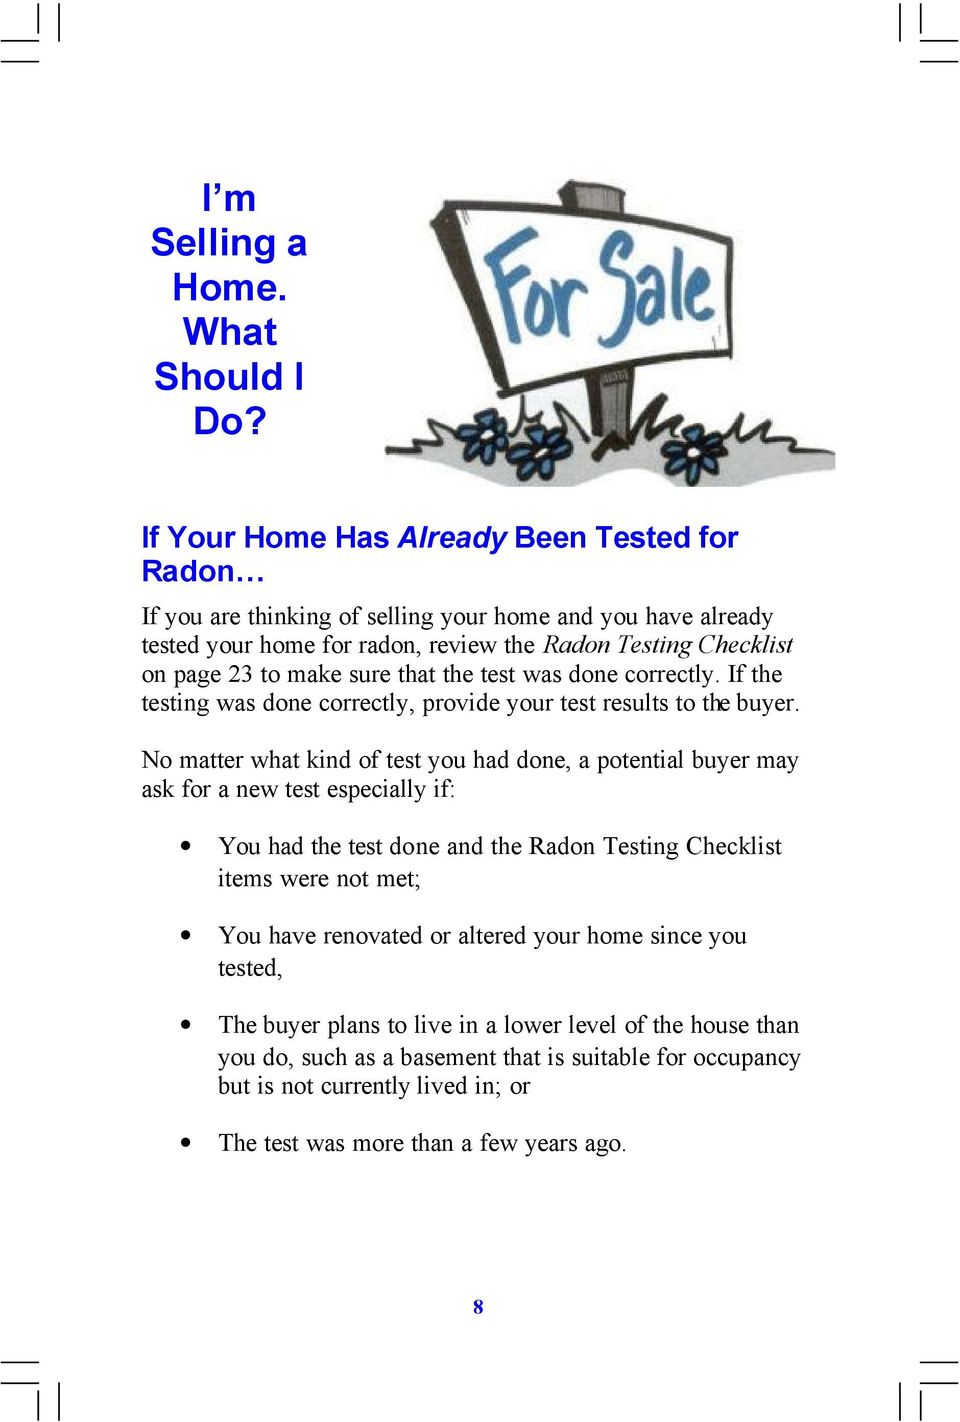 sure that the test was done correctly. If the testing was done correctly, provide your test results to the buyer.